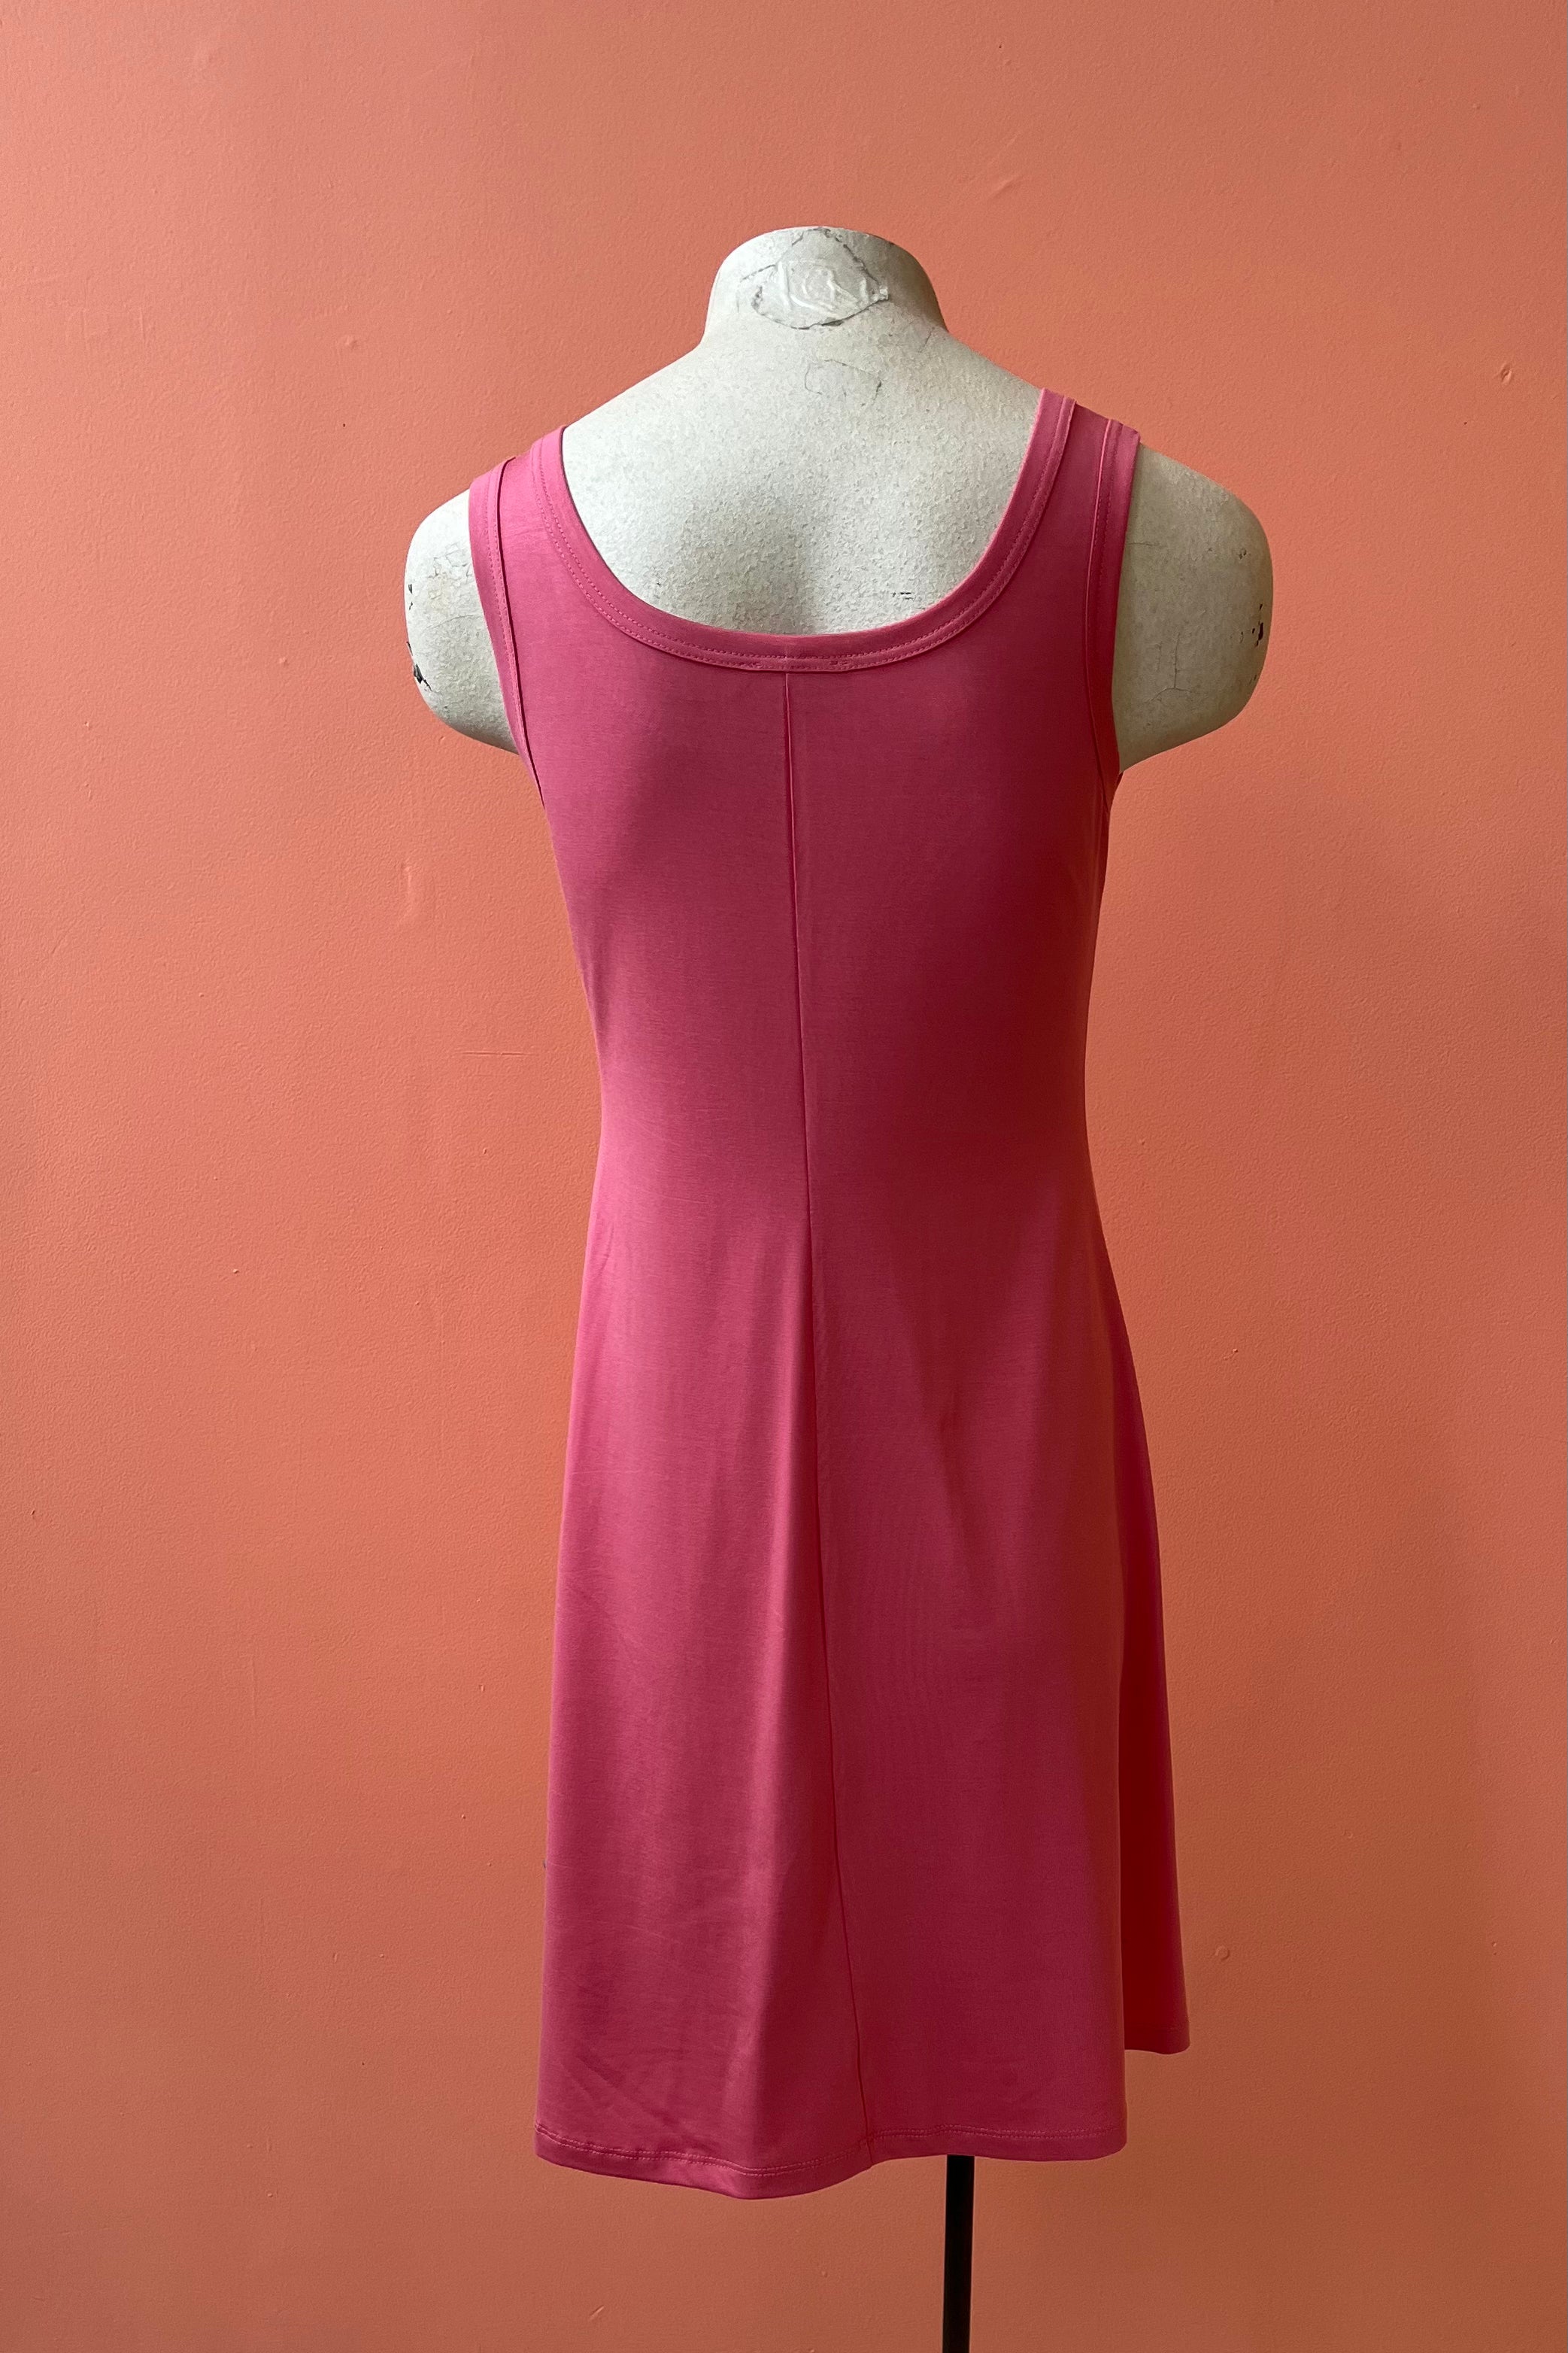 B-Dress by Yul Voy, Coral, back view, tank dress, wide straps, scoop neck front and back, A-line shape, above the knee, sizes XS to XXL, made in Montreal